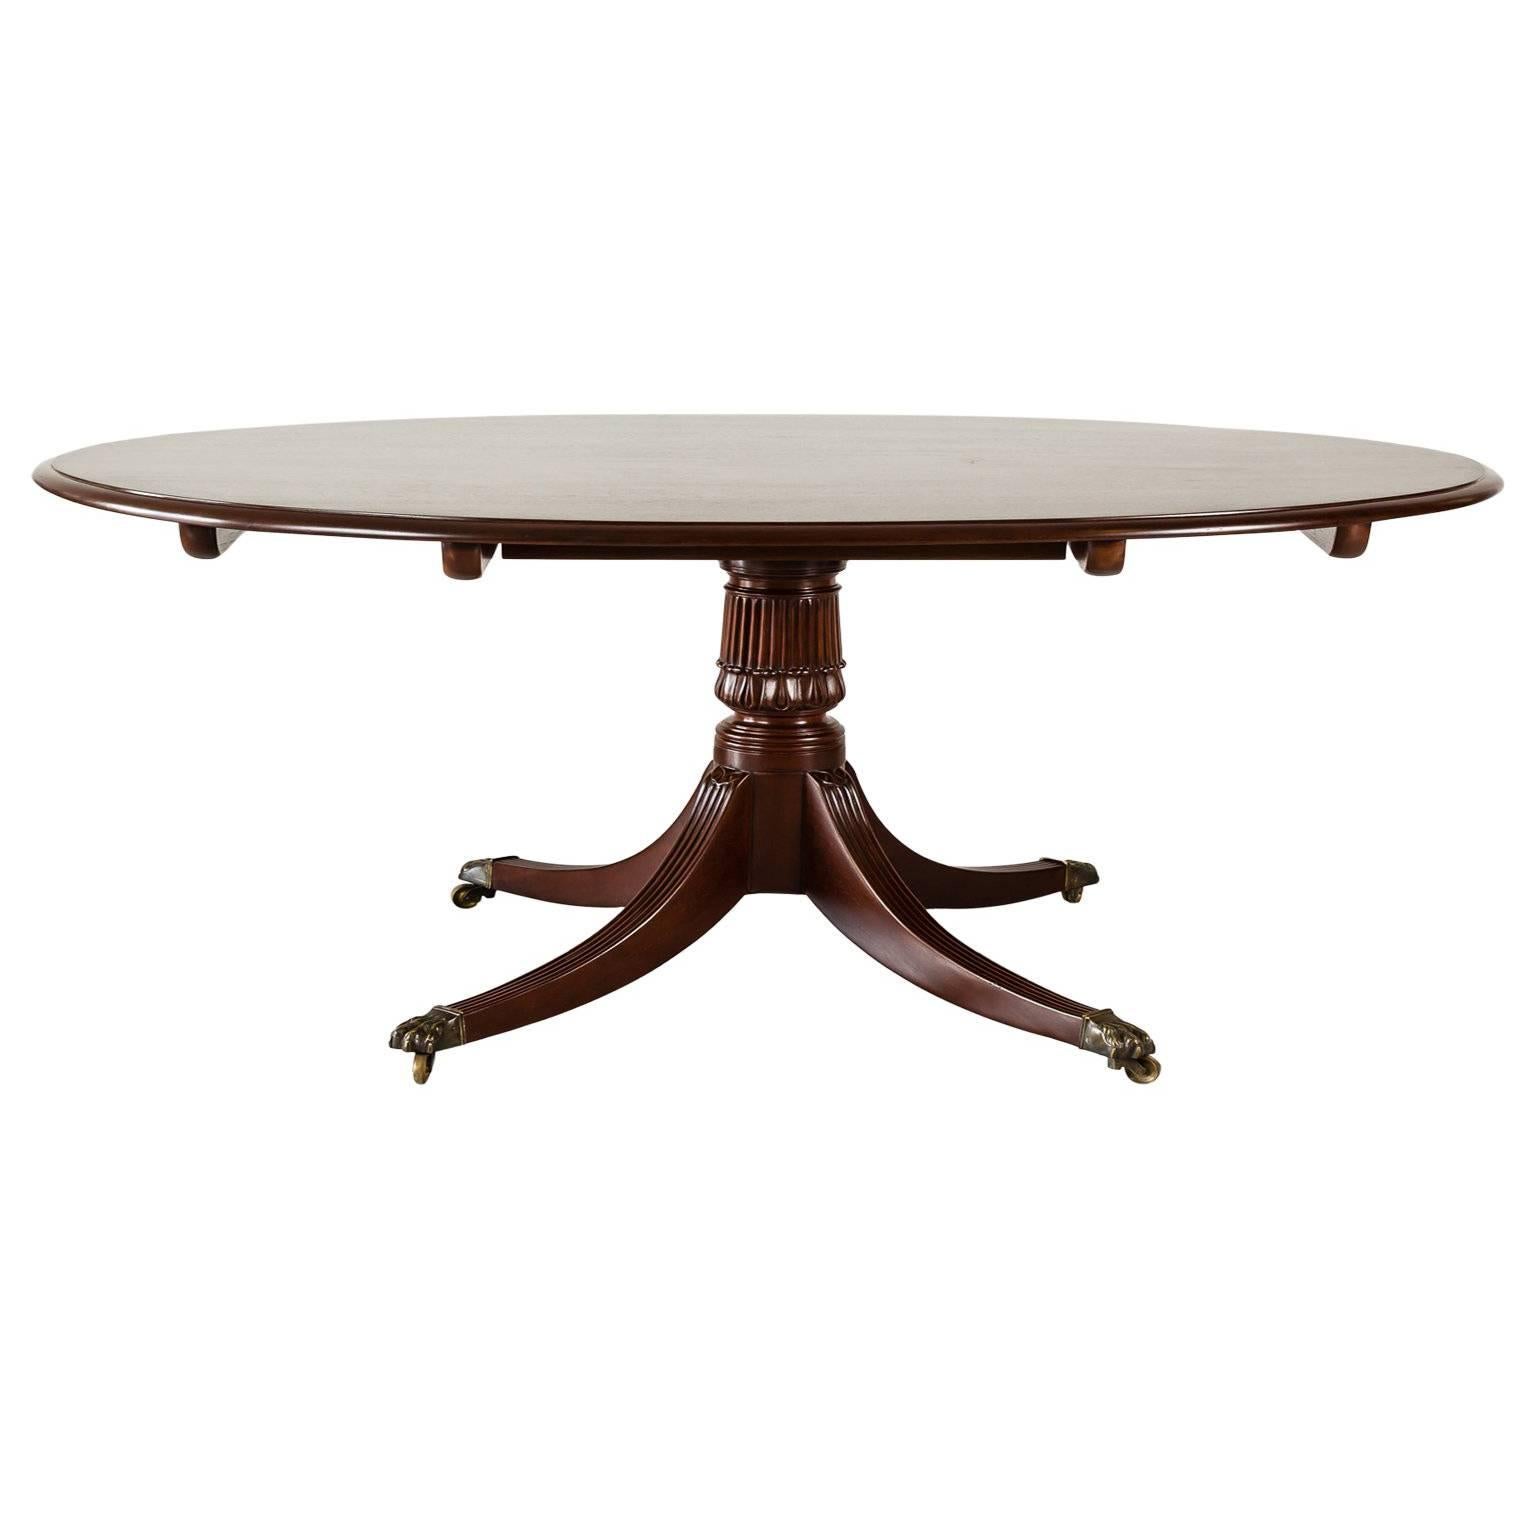 Antique Anglo-Indian or British Colonial Mahogany Oval Table For Sale